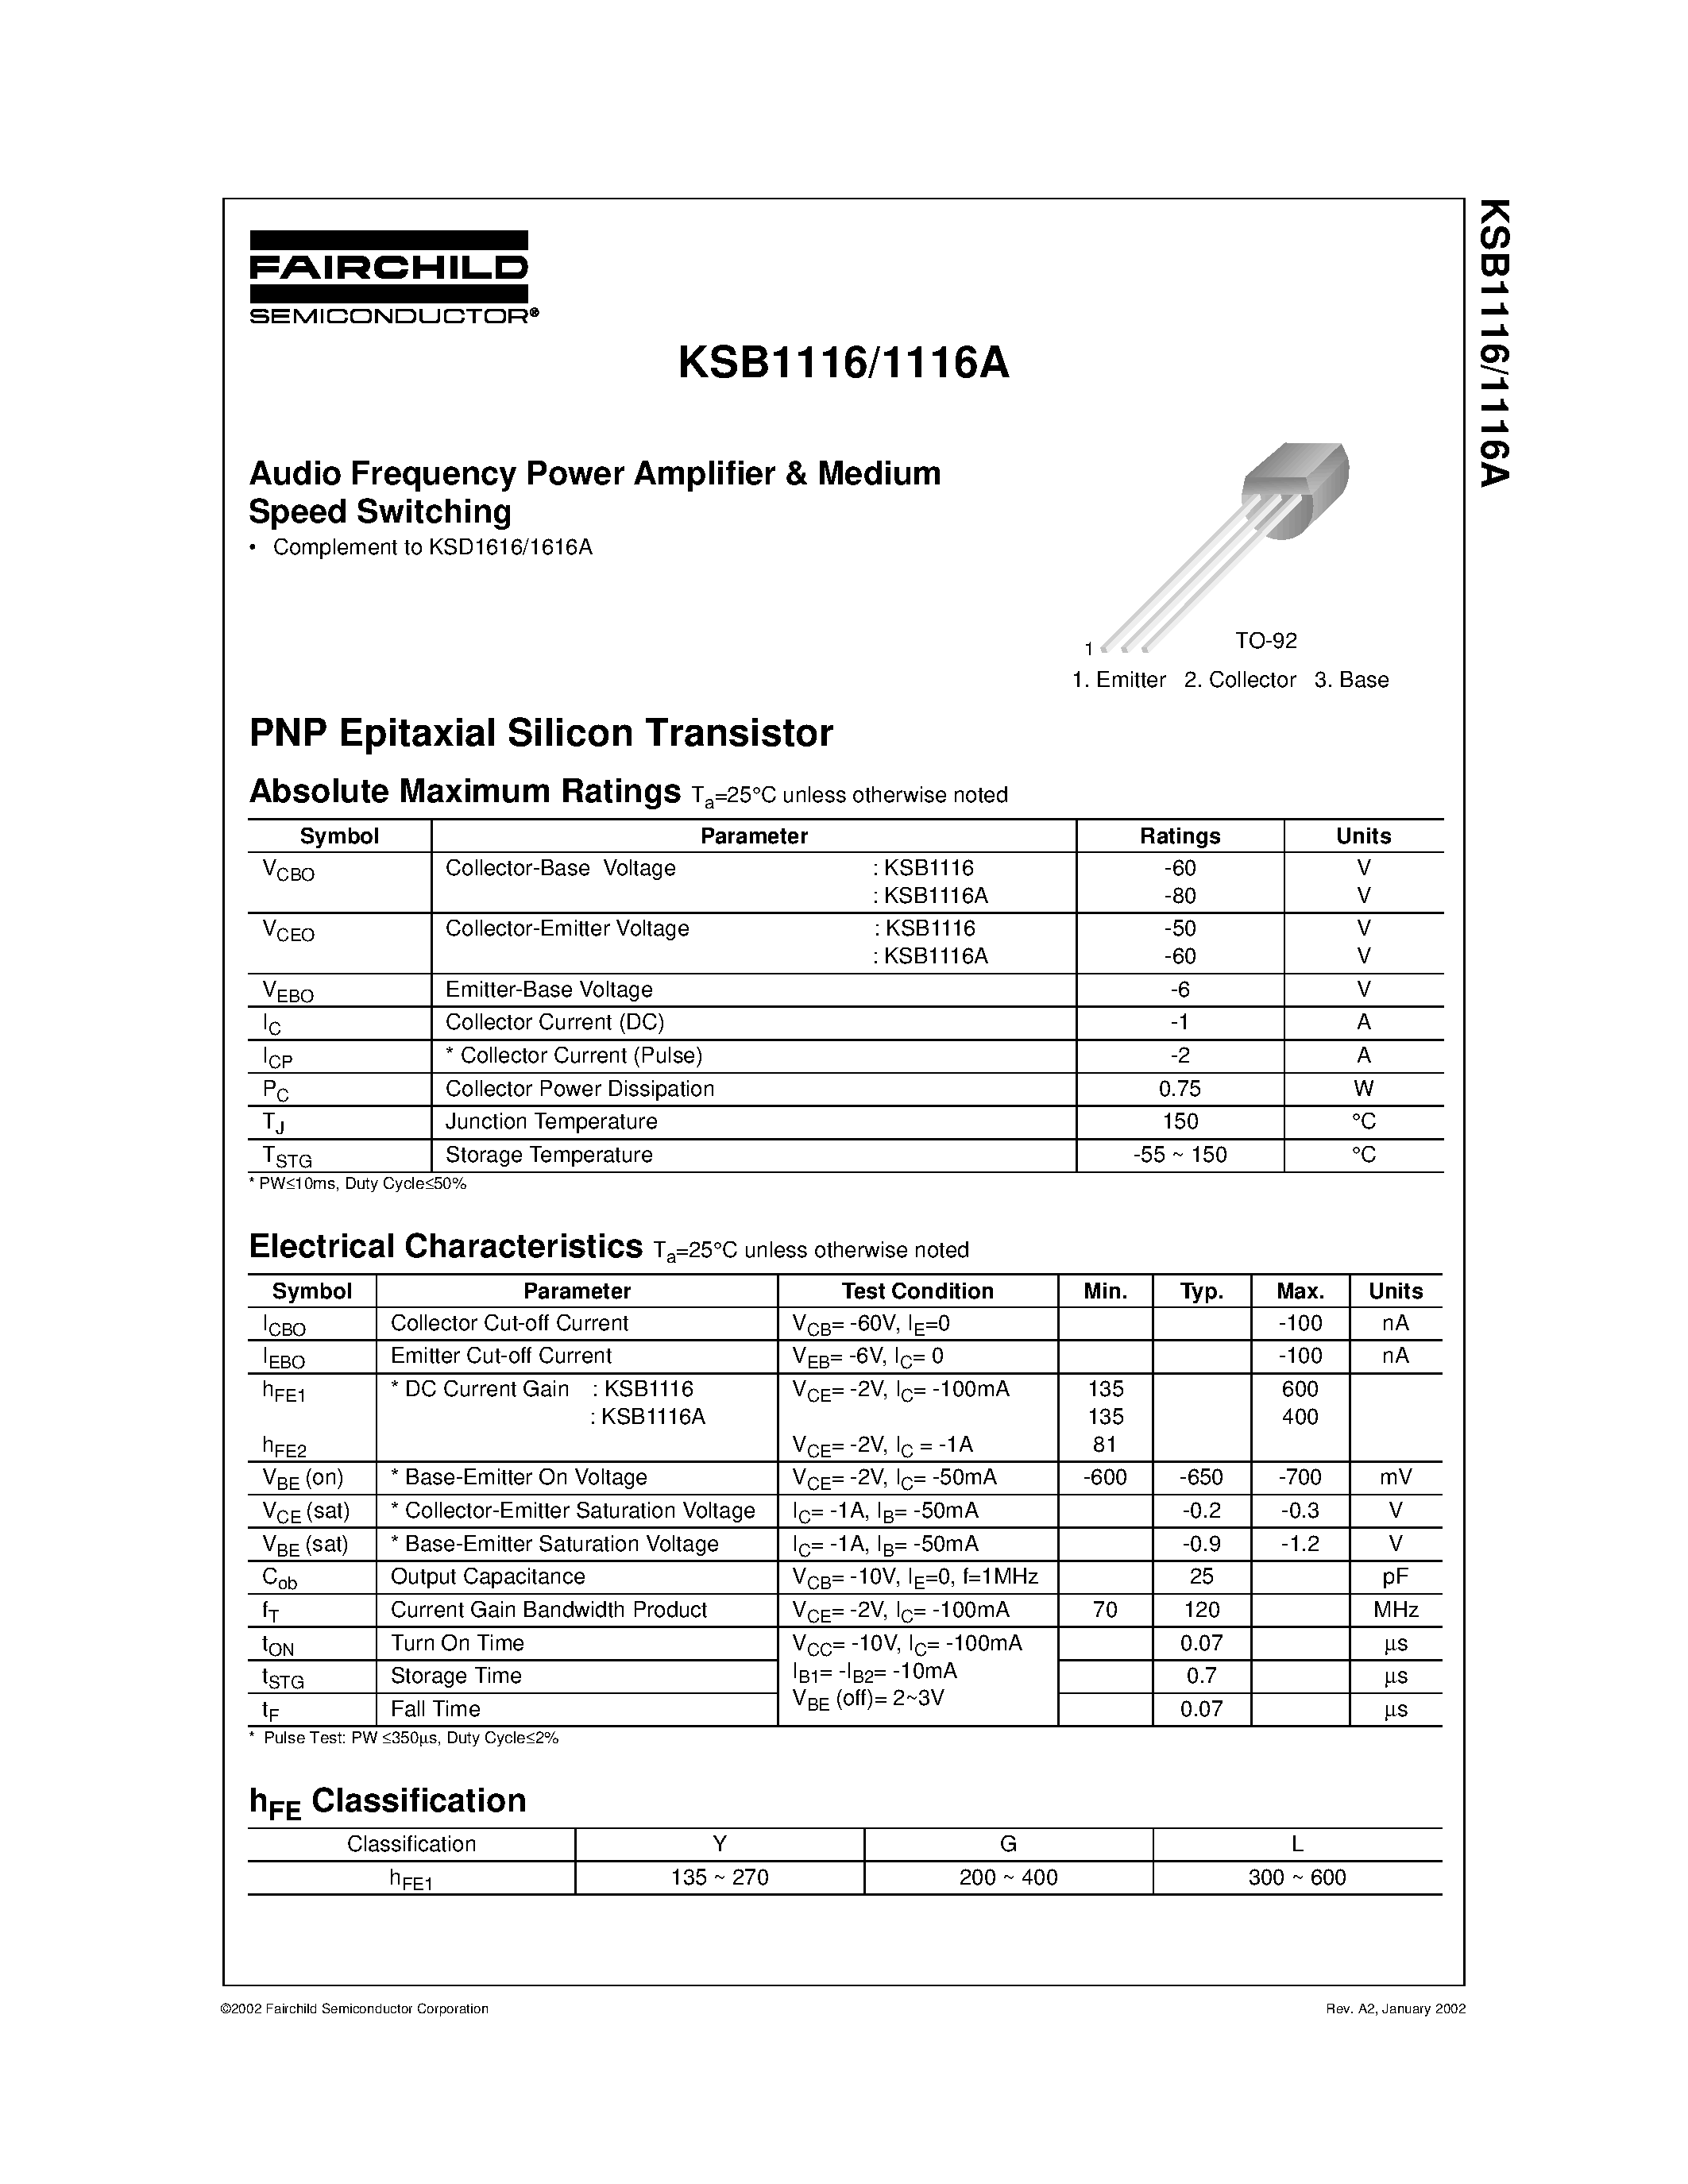 Datasheet KSB1116A - Audio Frequency Power Amplifier & Medium Speed Switching page 1